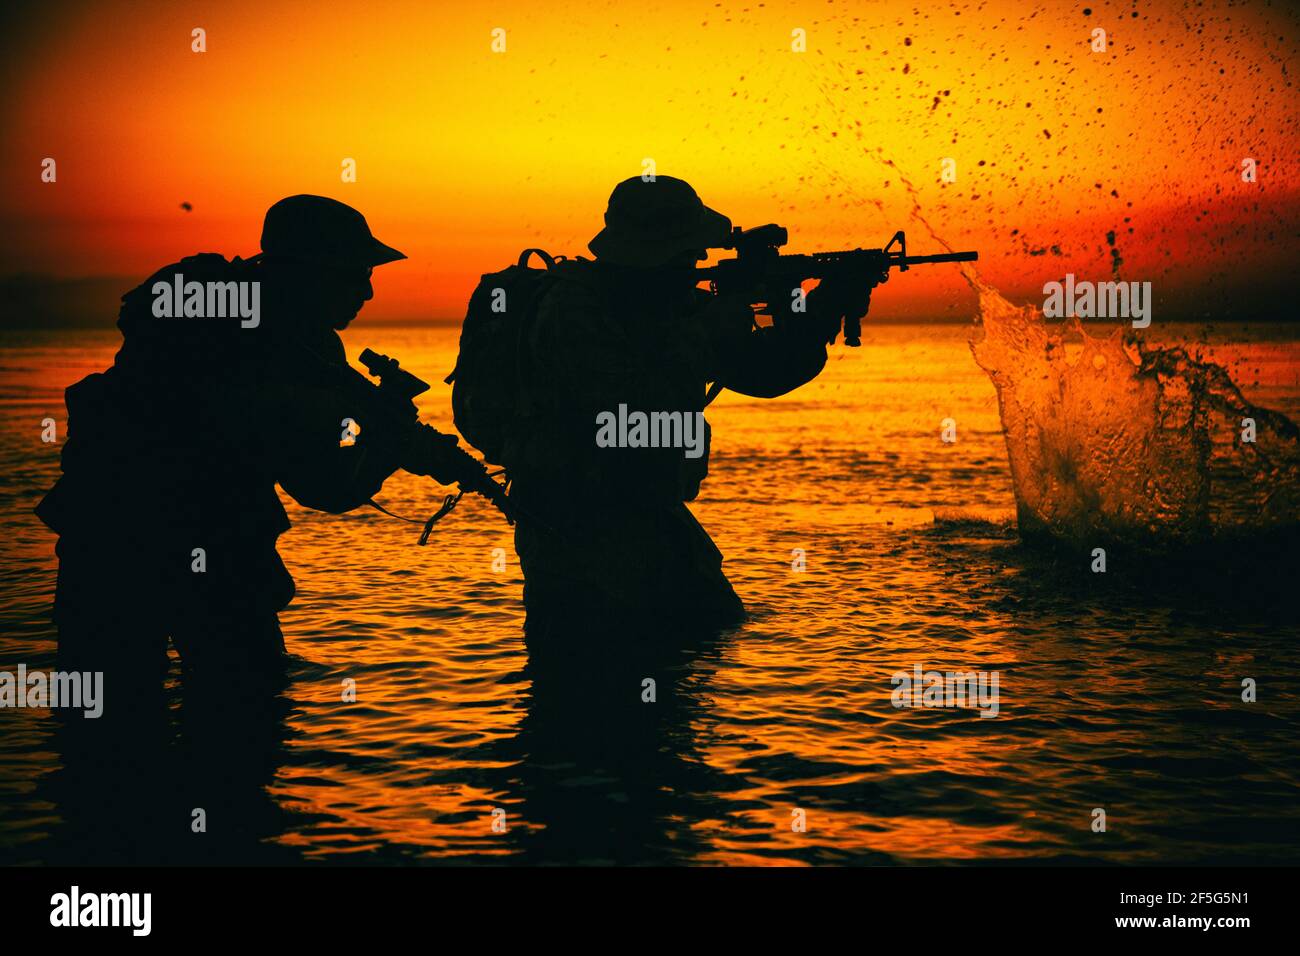 Army soldiers team, special operation forces infantrymen landing on seacoast, aiming and shooting with service rifle during firefight on shore at evening or morning time. Military amphibious operation Stock Photo